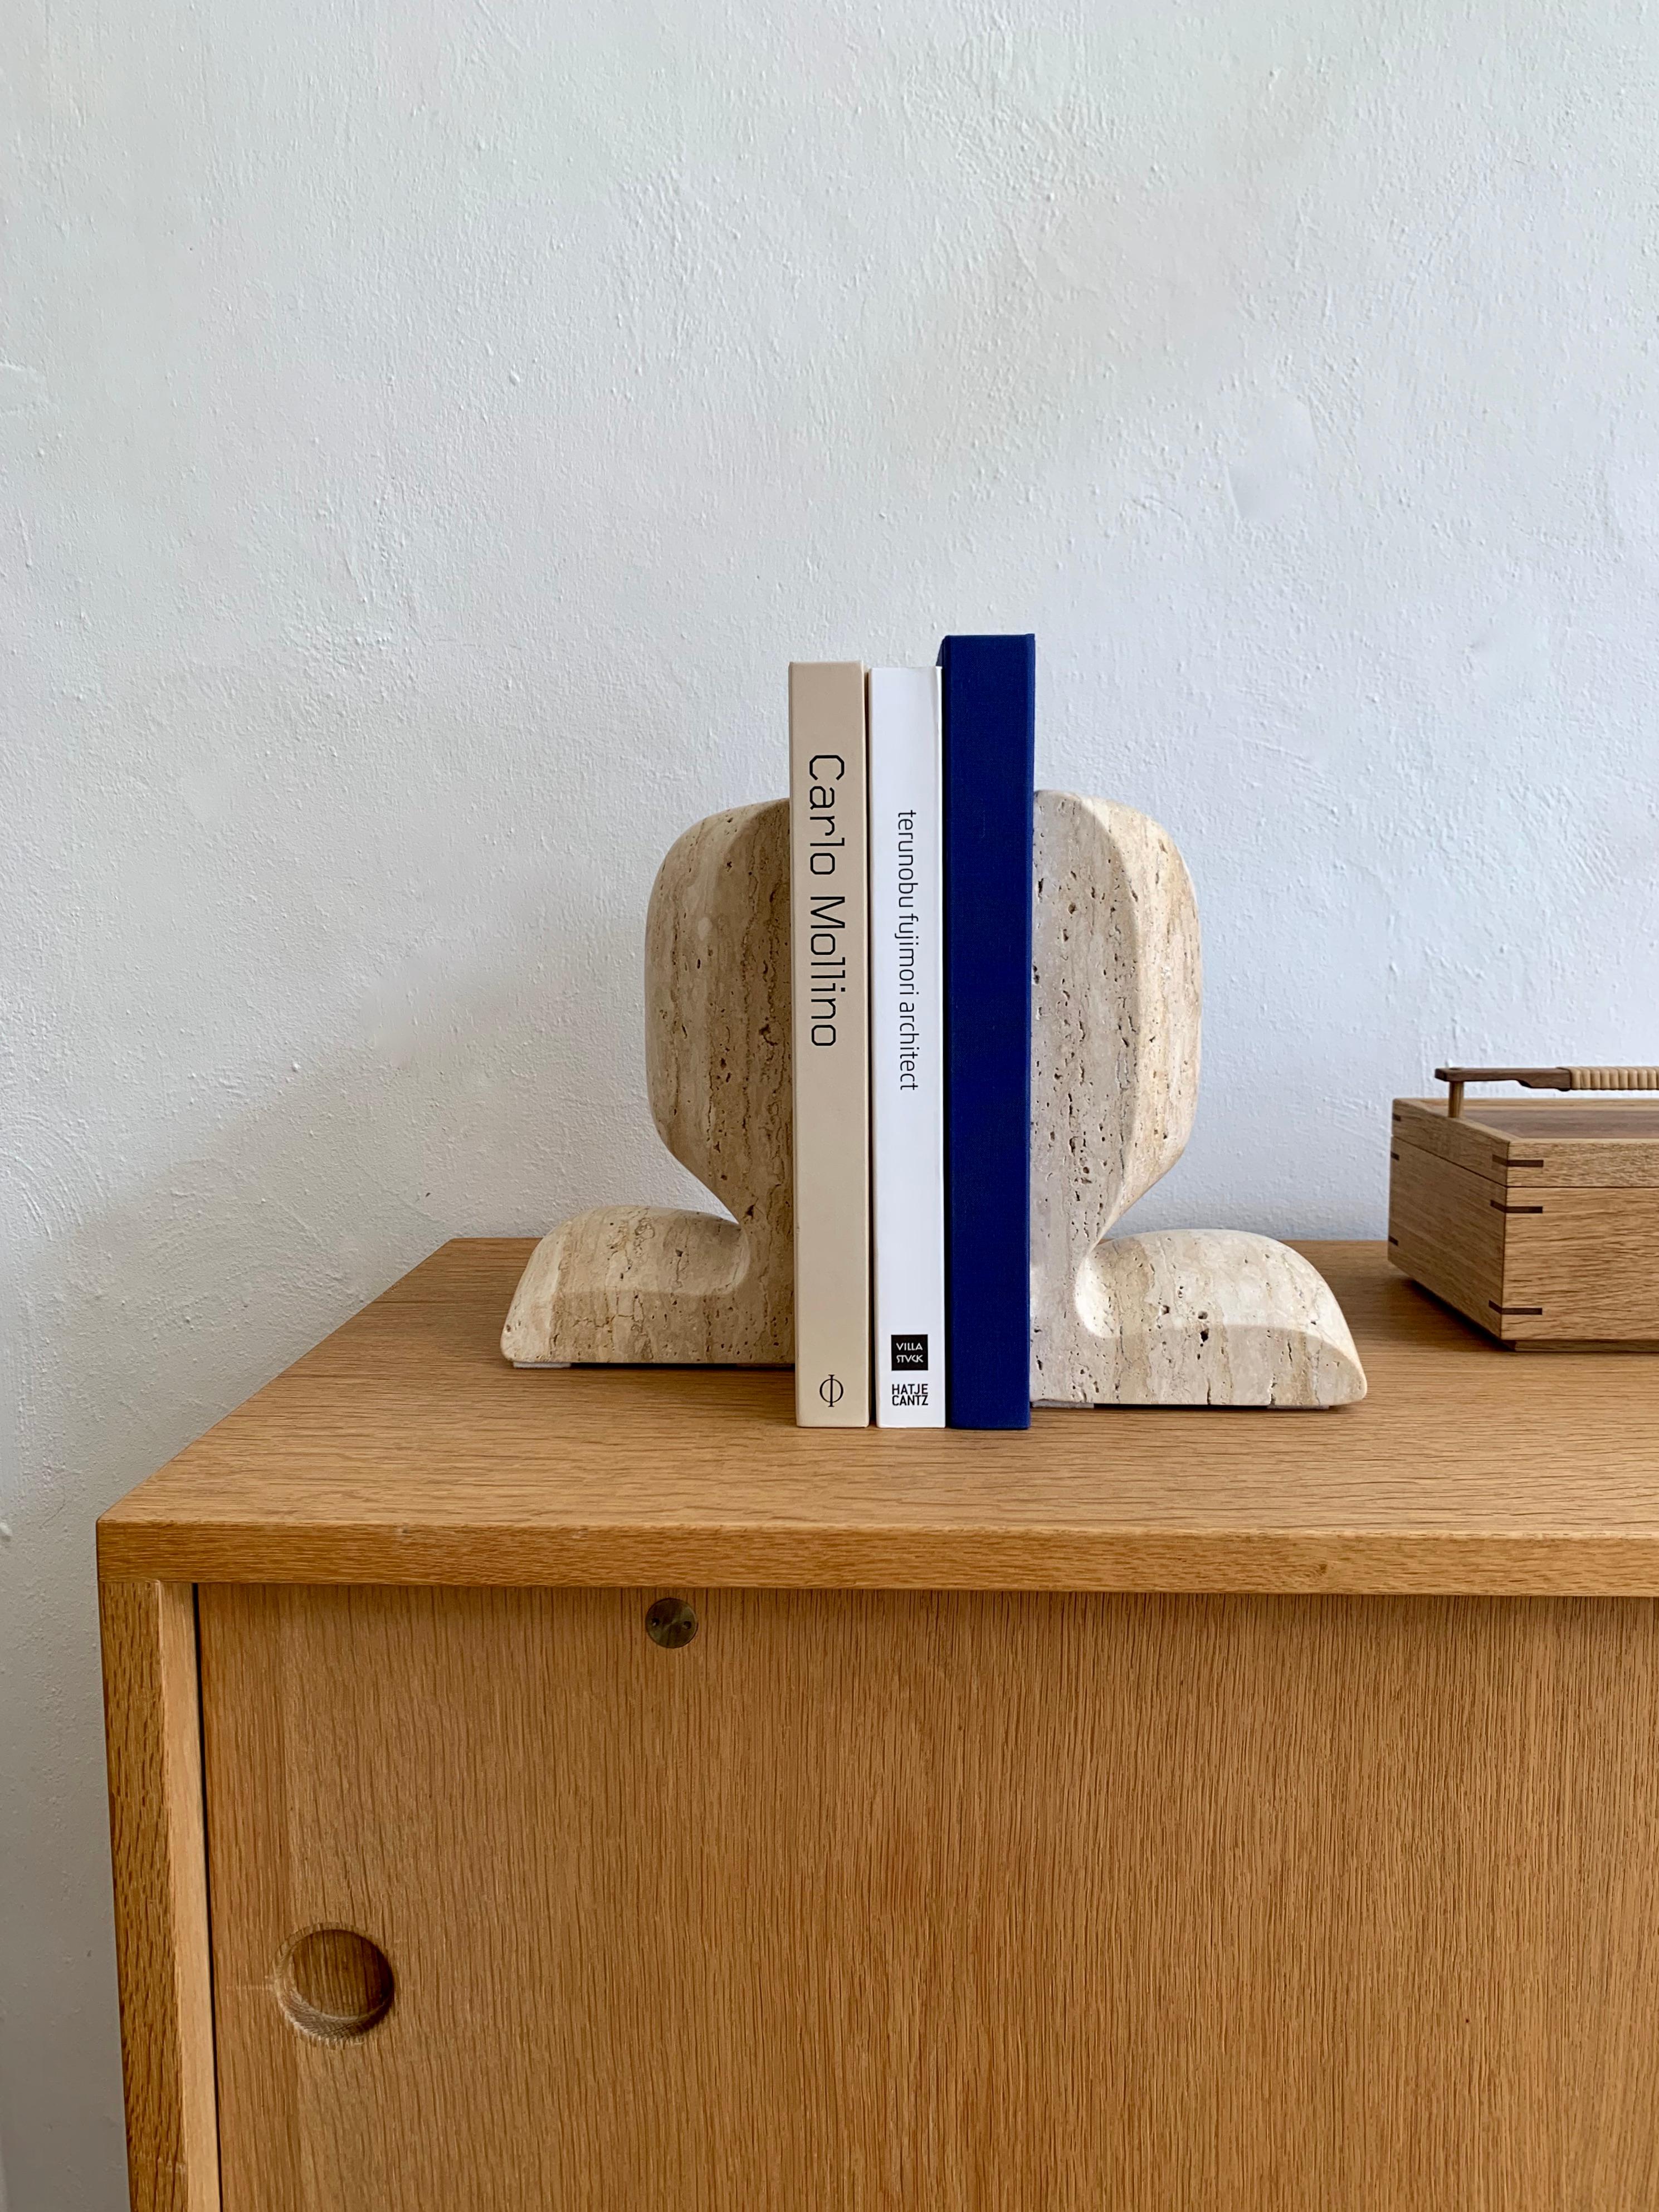 Marble 'SLO' Book Ends by Christophe Delcourt for Collection Particulière  4